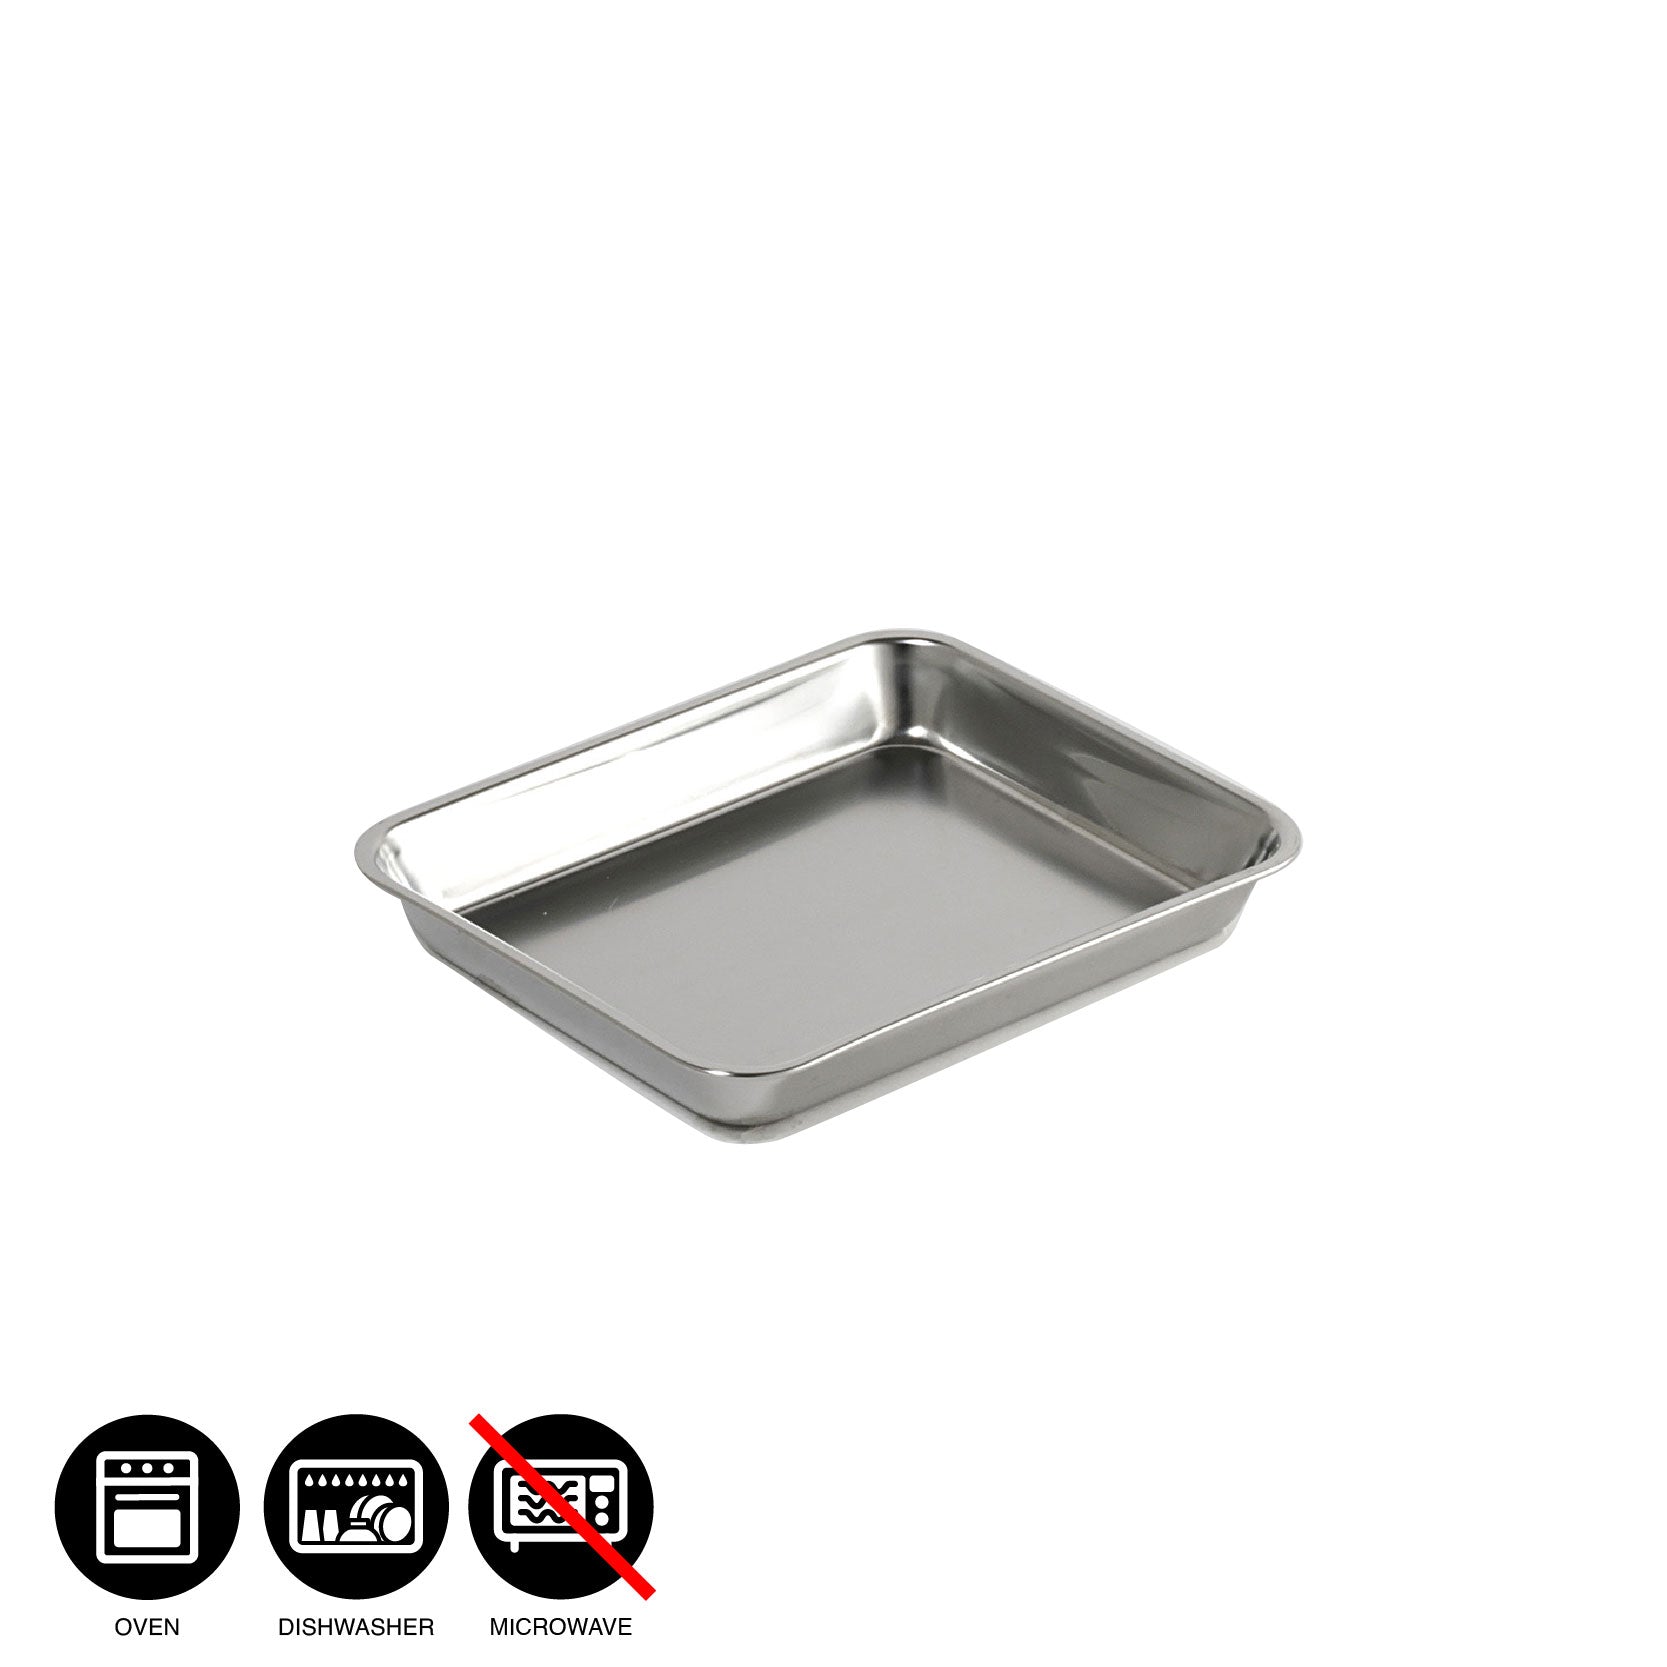 CLOVER Stainless steel tray / Cabinet - No.10